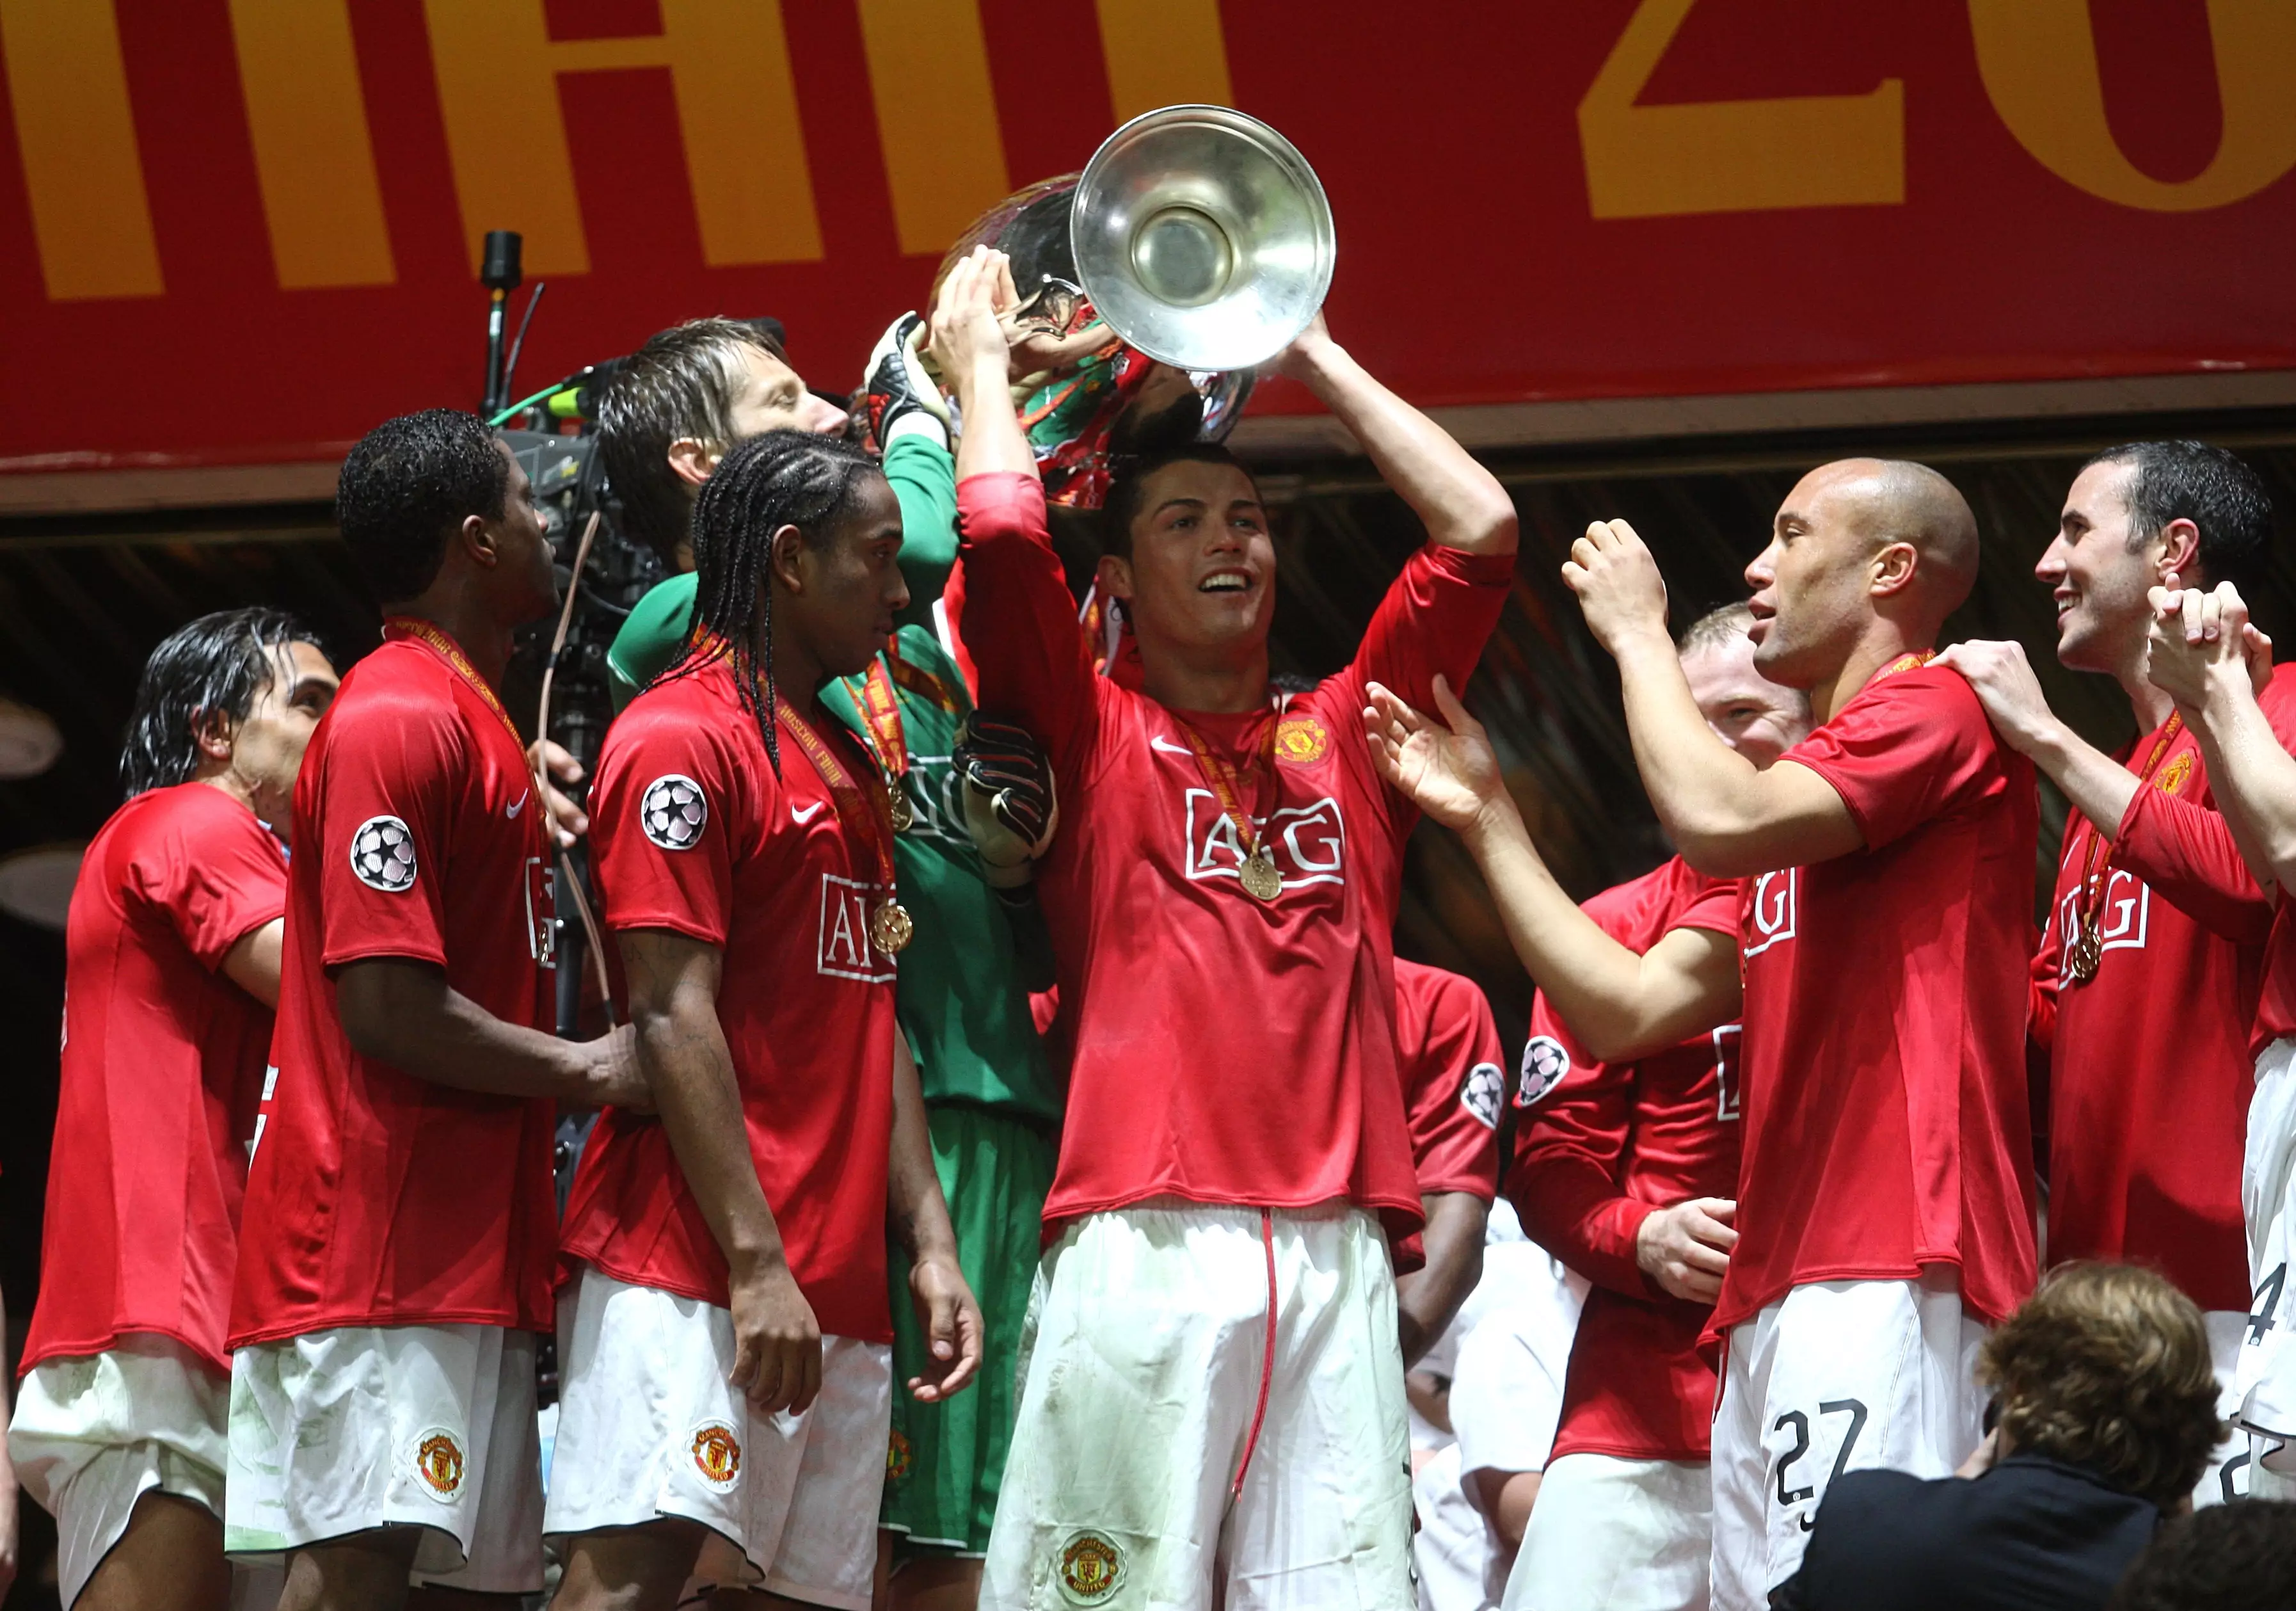 Ronaldo helped United to the Champions League and scored in the final. Image: PA Images